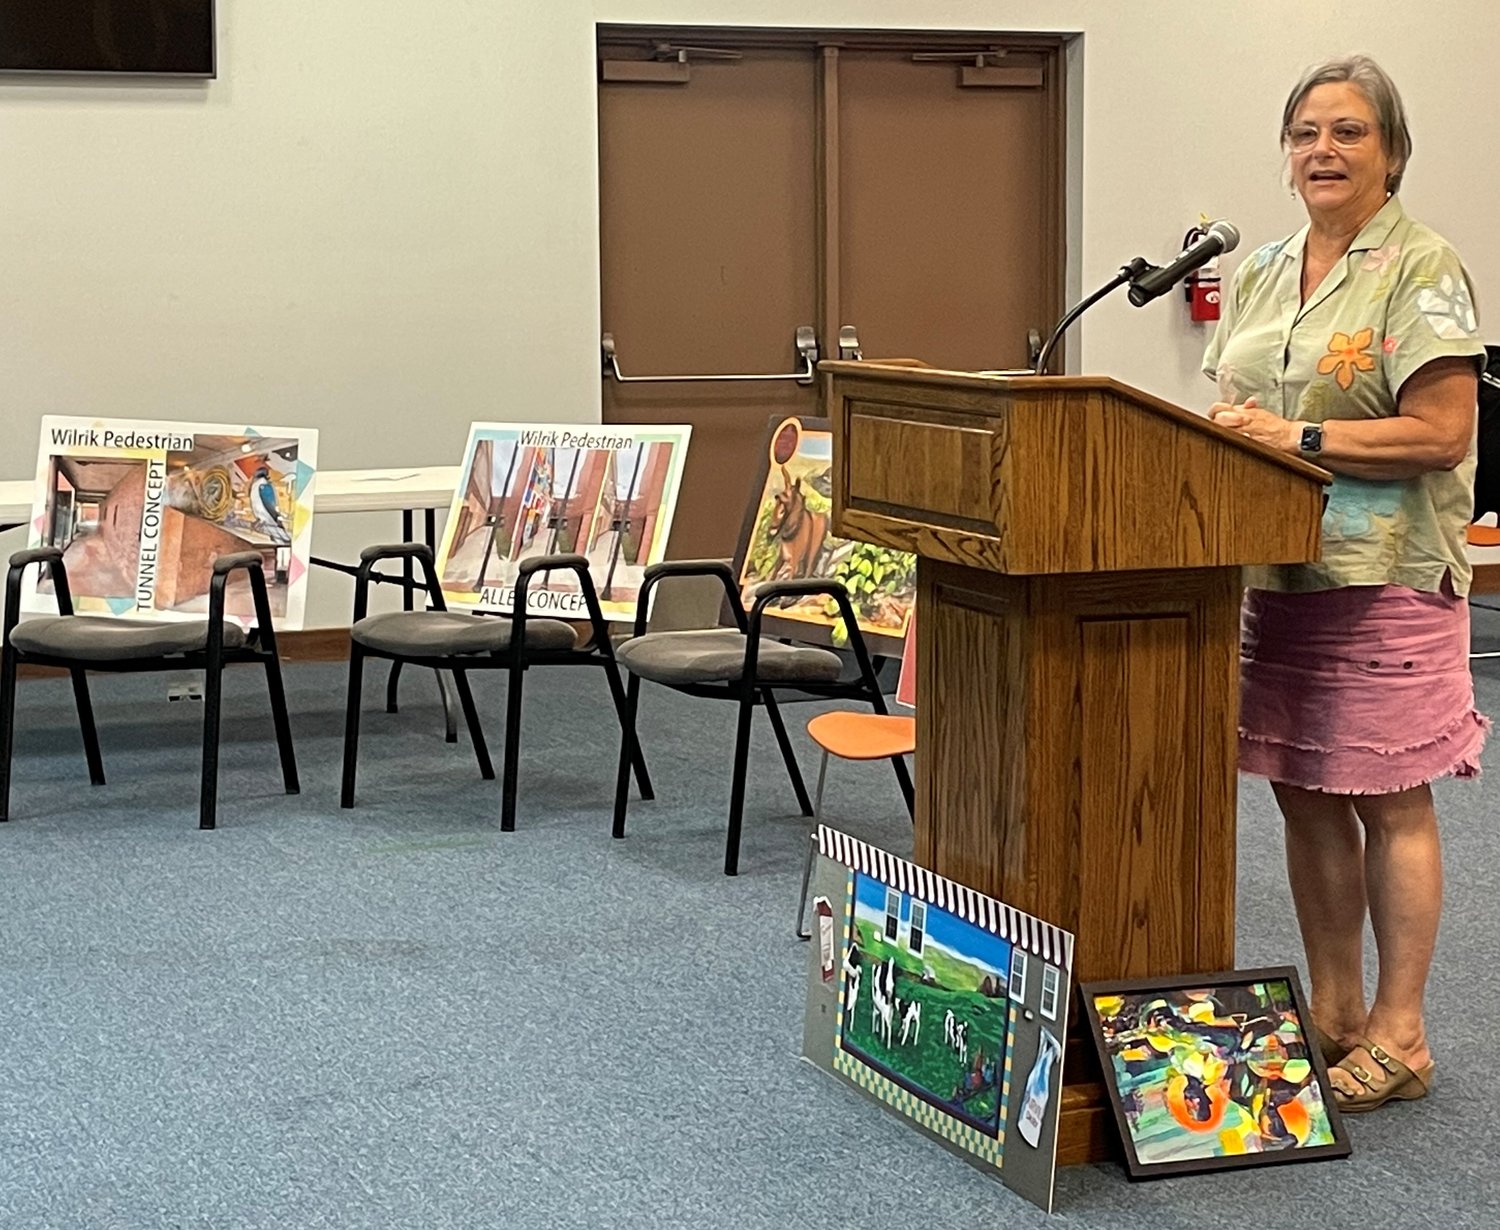 Liz Whitmore, the historic preservation planner for the city of Sanford, talks with the Spring Lake Board of Aldermen on Monday night about how Sanford has been able to bring public art, including murals, to that community.